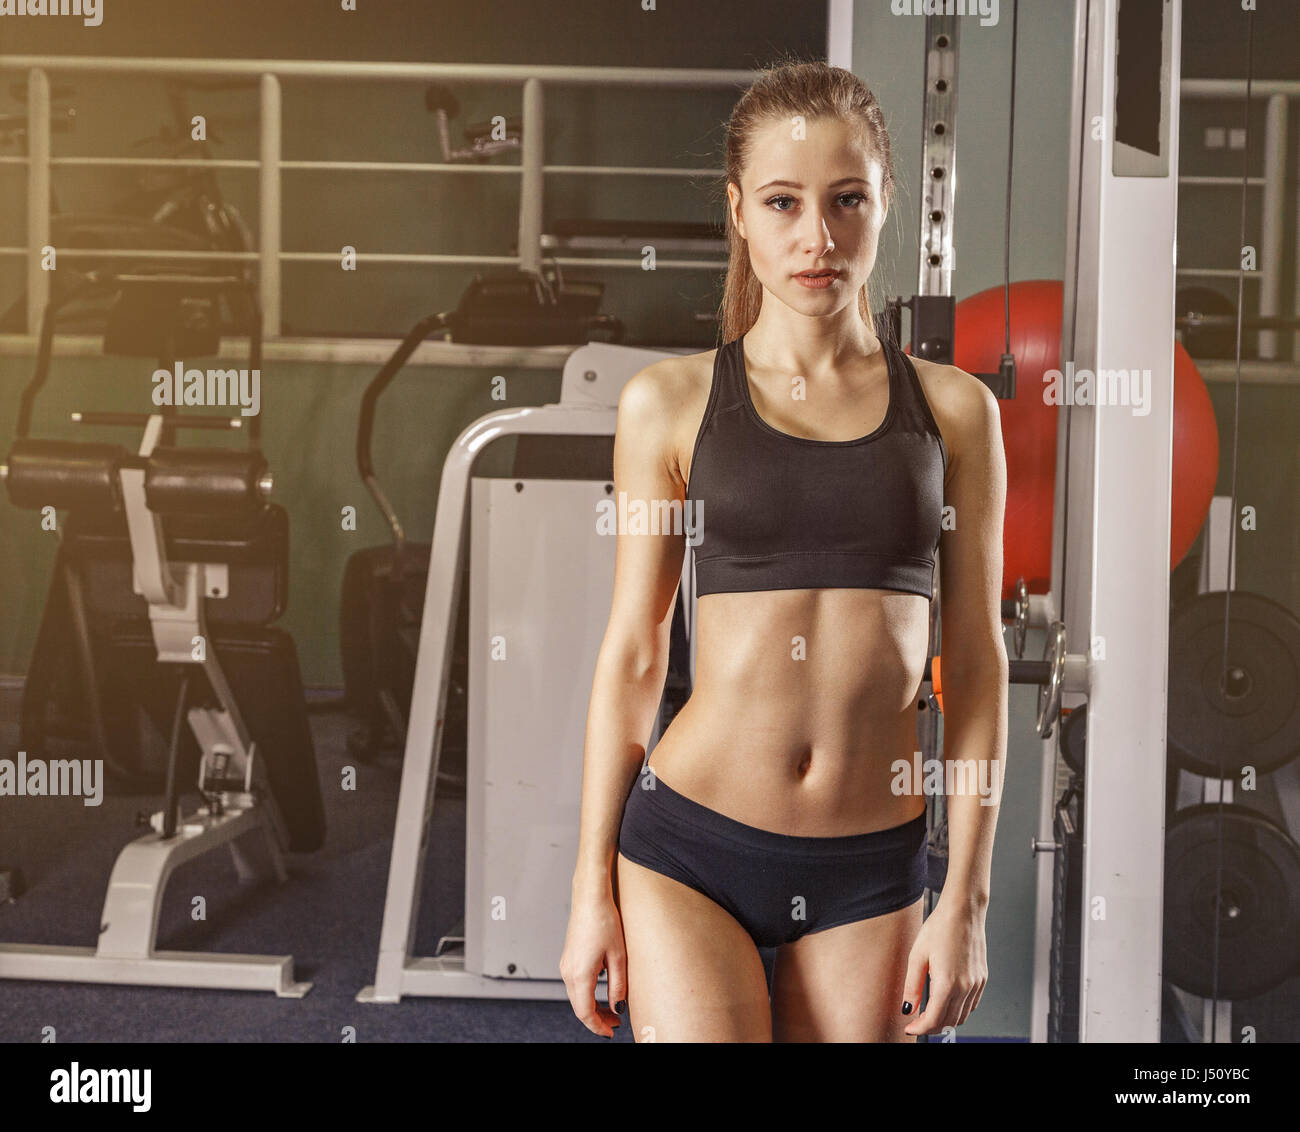 Young woman at the gym exercising beutiful still life Stock Photo